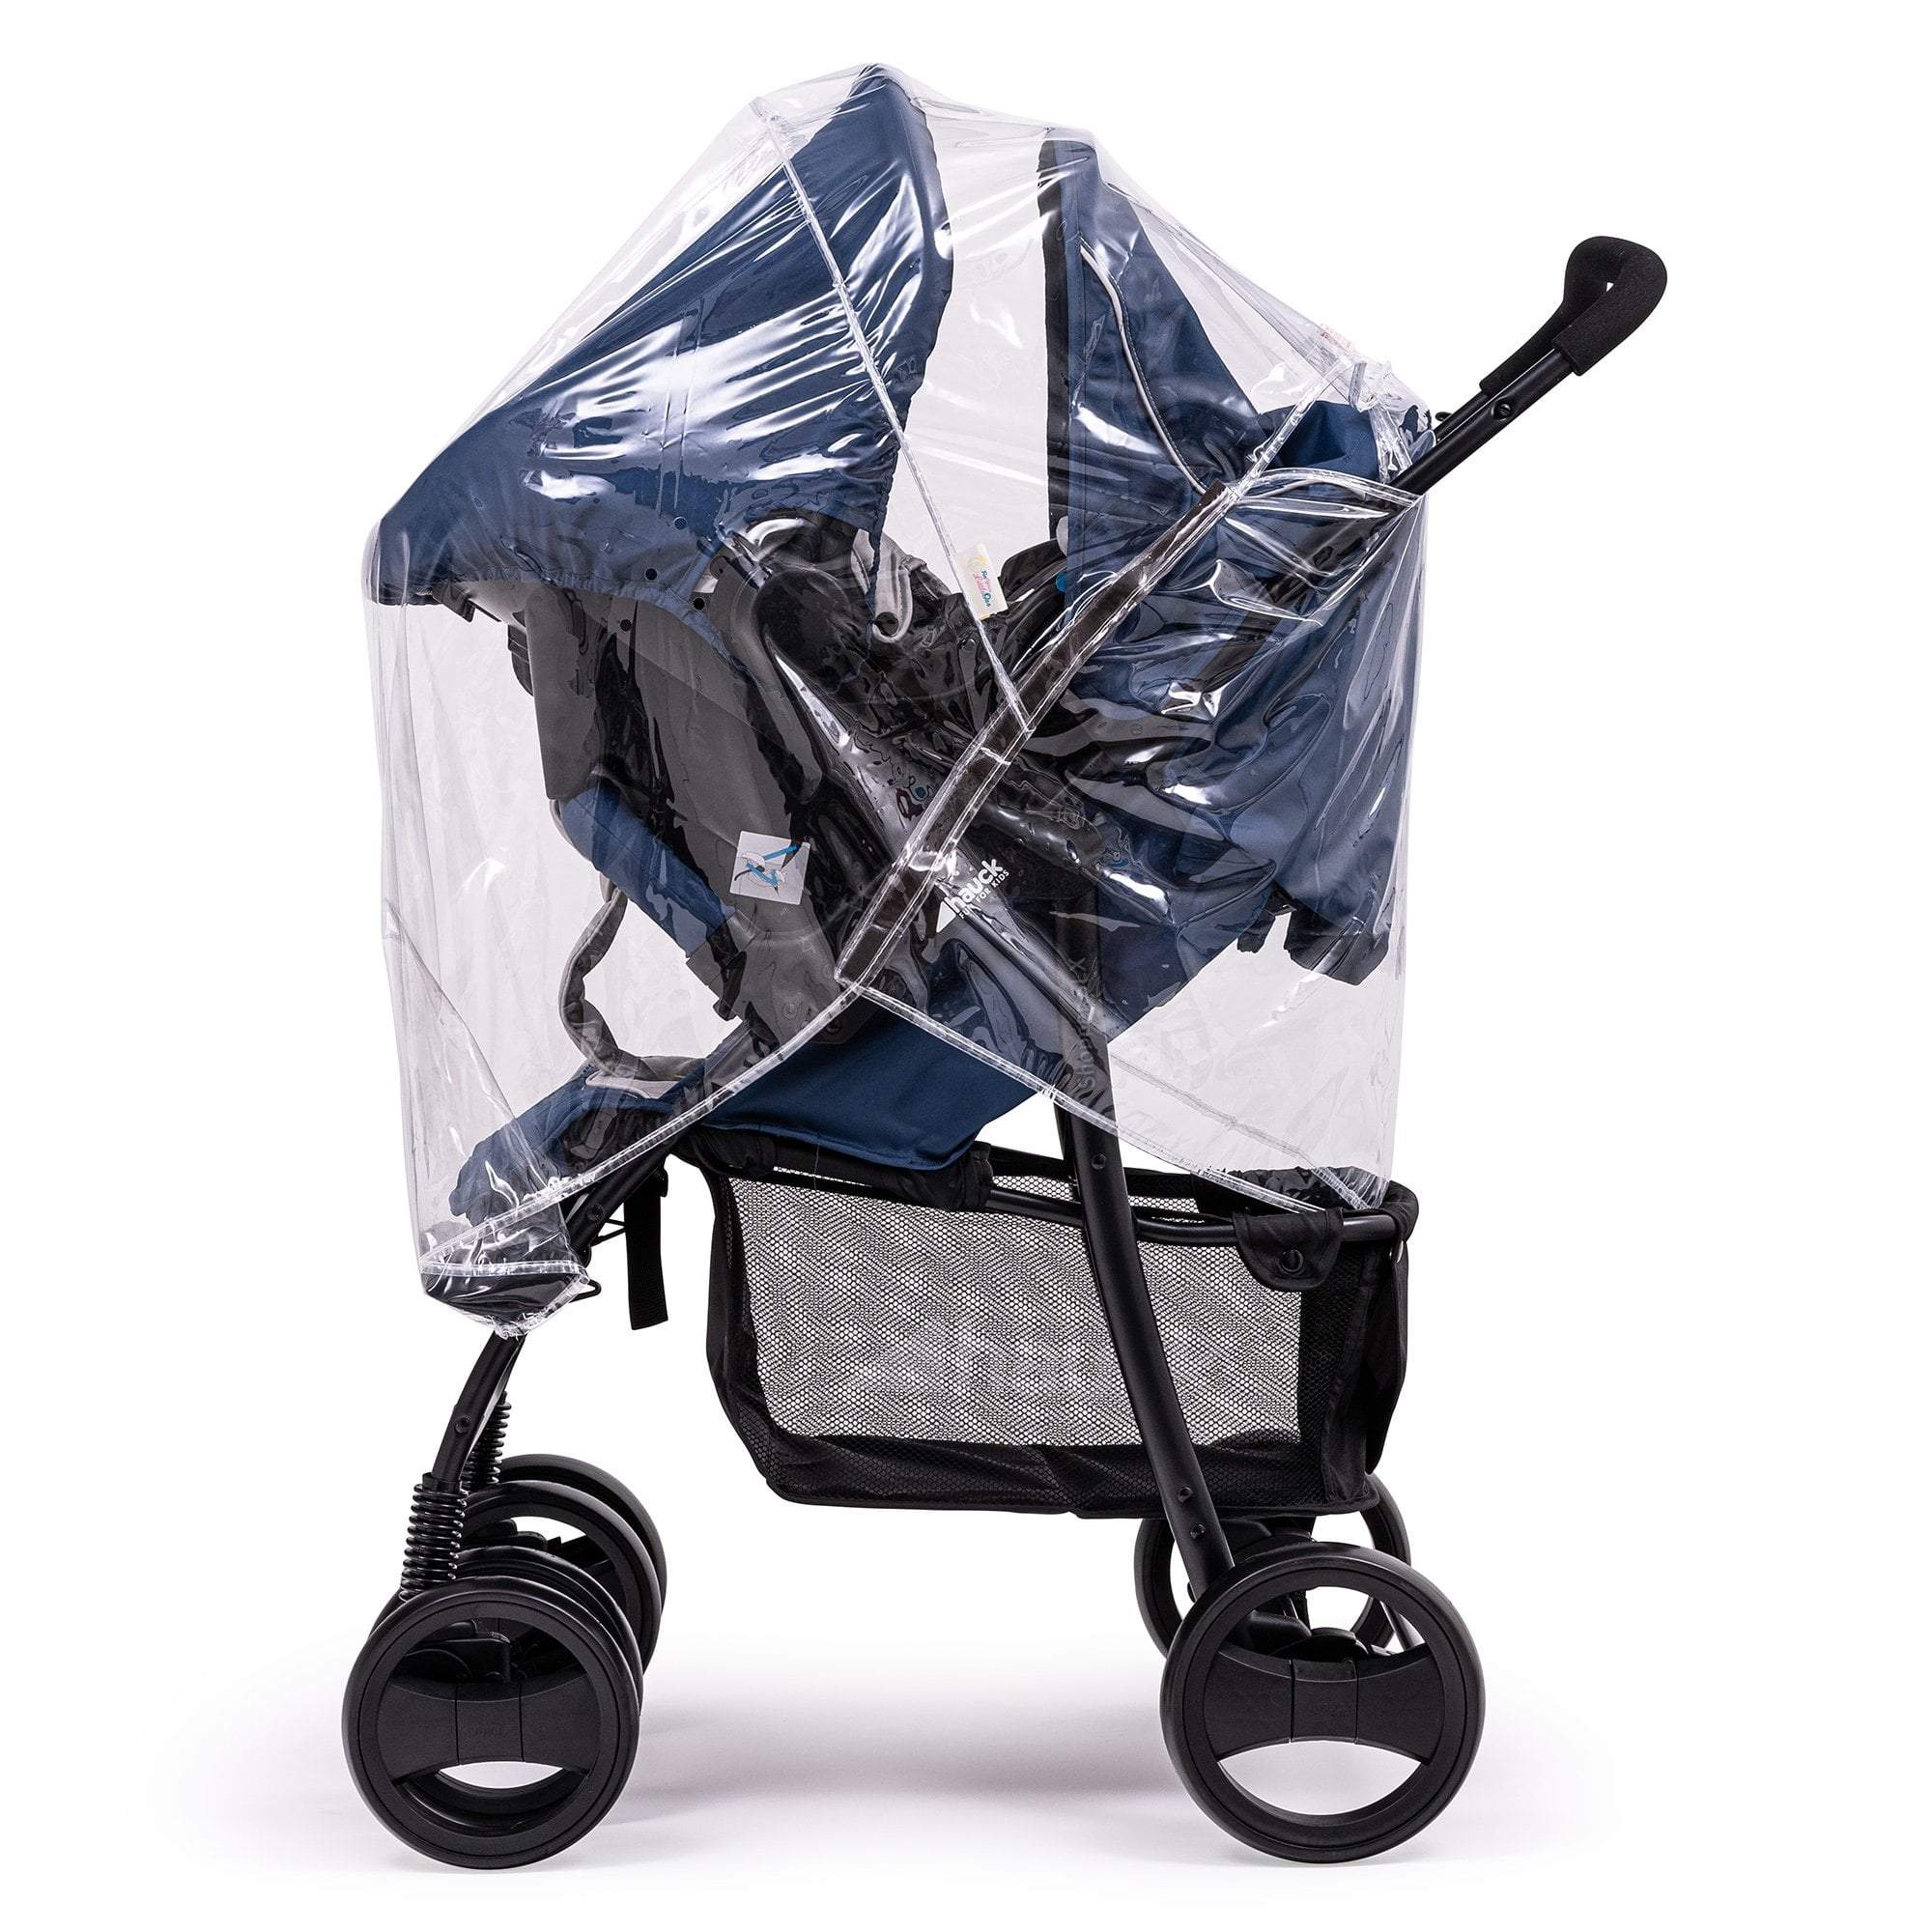 Travel System Raincover Compatible with Phil & Teds - Fits All Models - For Your Little One